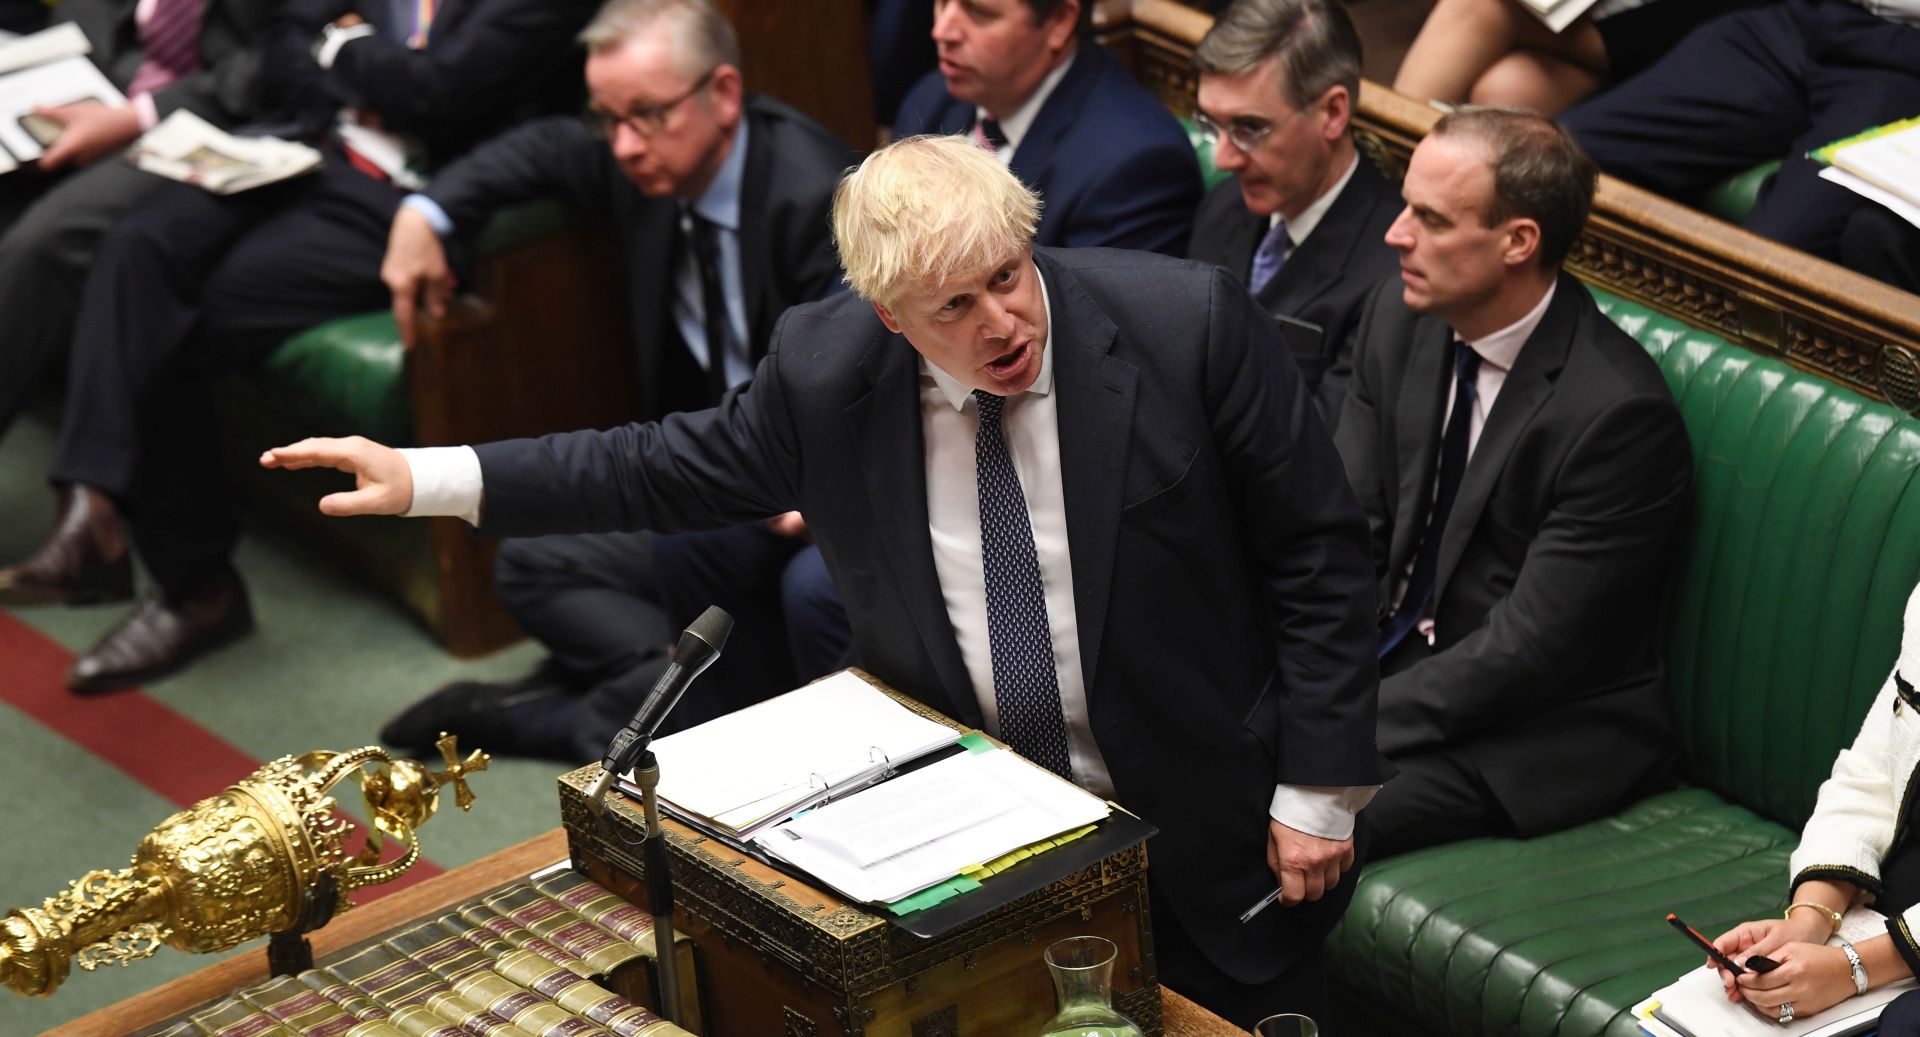 epa07943422 A handout picture made available by the UK Parliament shows British Prime Minister Boris Johnson speaking during Prime Minister's Questions in the House of Commons in London, Britain, 23 October 2019. Johnson is urging MPs to back his Brexit deal in a final bid to get the UK to leave the EU by the end of the month.  EPA/JESSICA TAYLOR / UK PARLIAMENT HANDOUT MANDATORY CREDIT: UK PARLIAMENT / JESSICA TAYLOR - Images must not be altered in any way. HANDOUT EDITORIAL USE ONLY/NO SALES